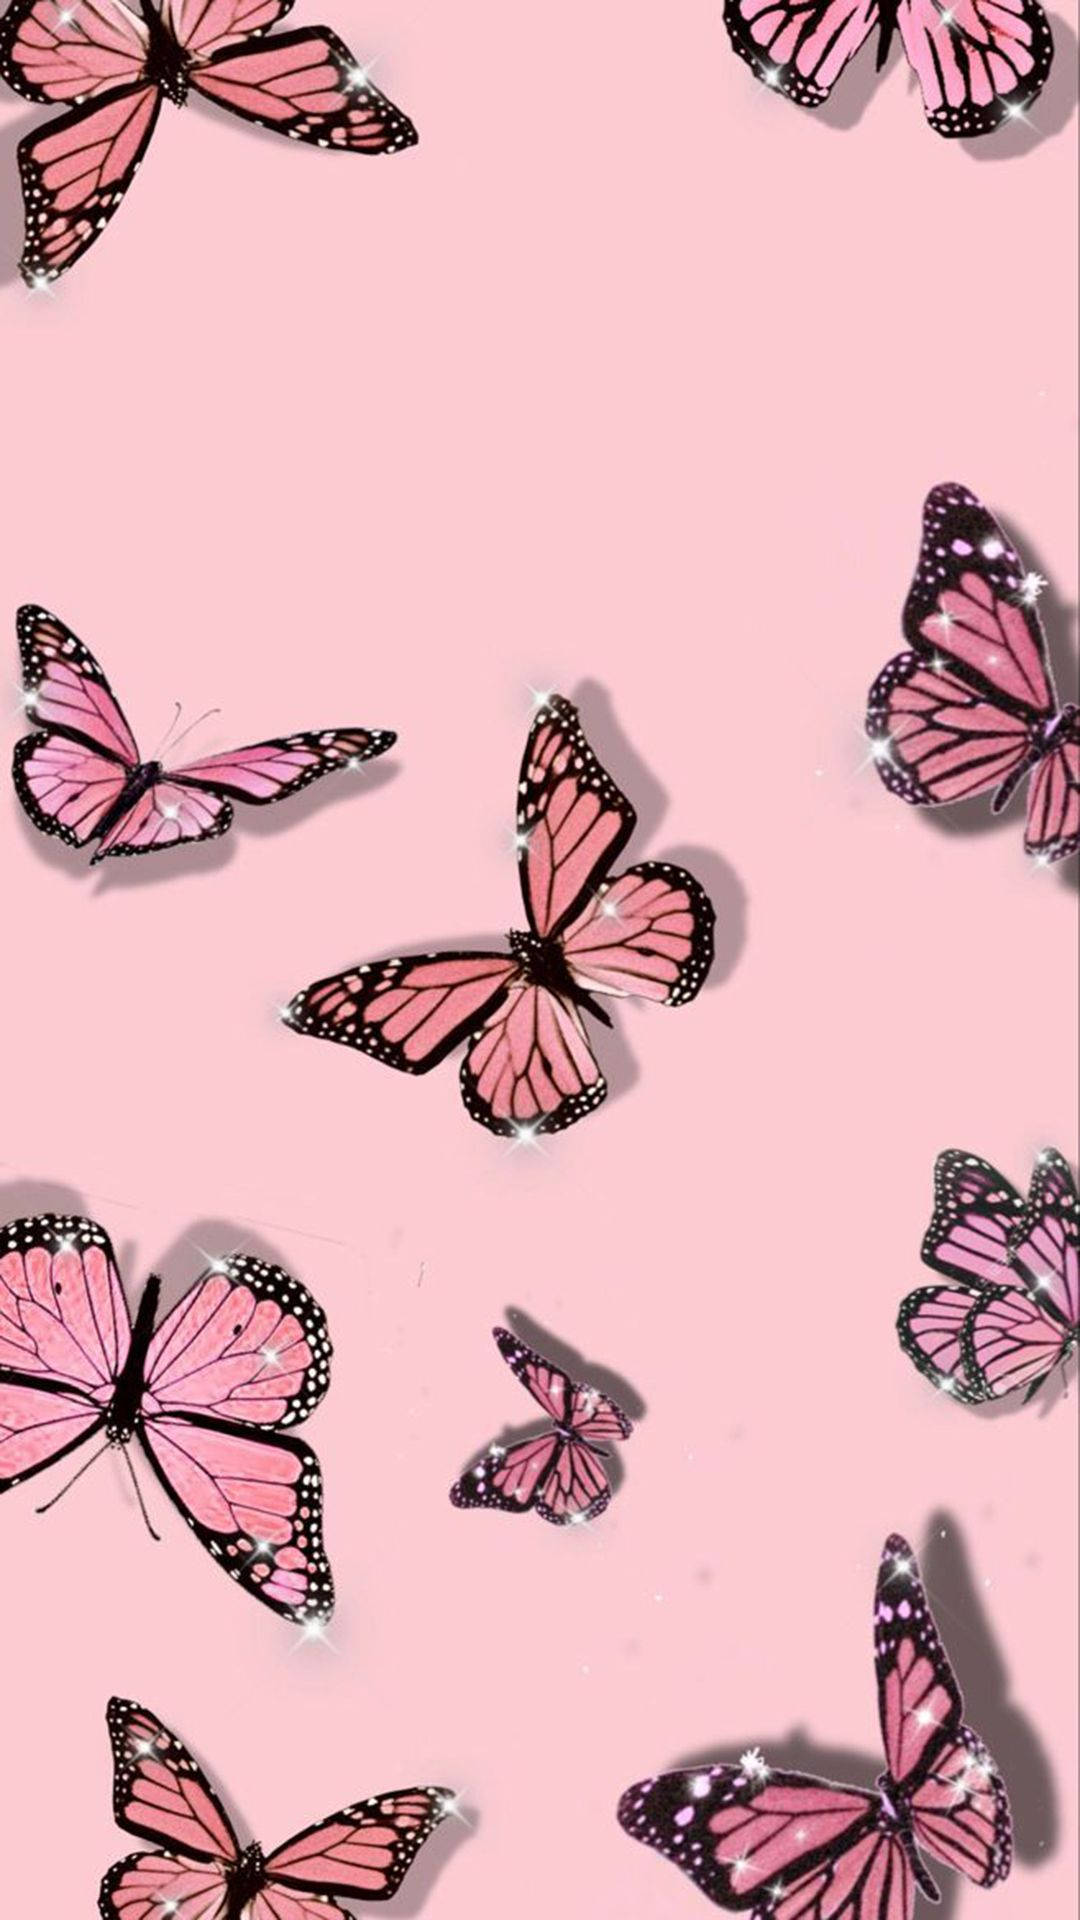 Flying Butterflies On Aesthetic Pink